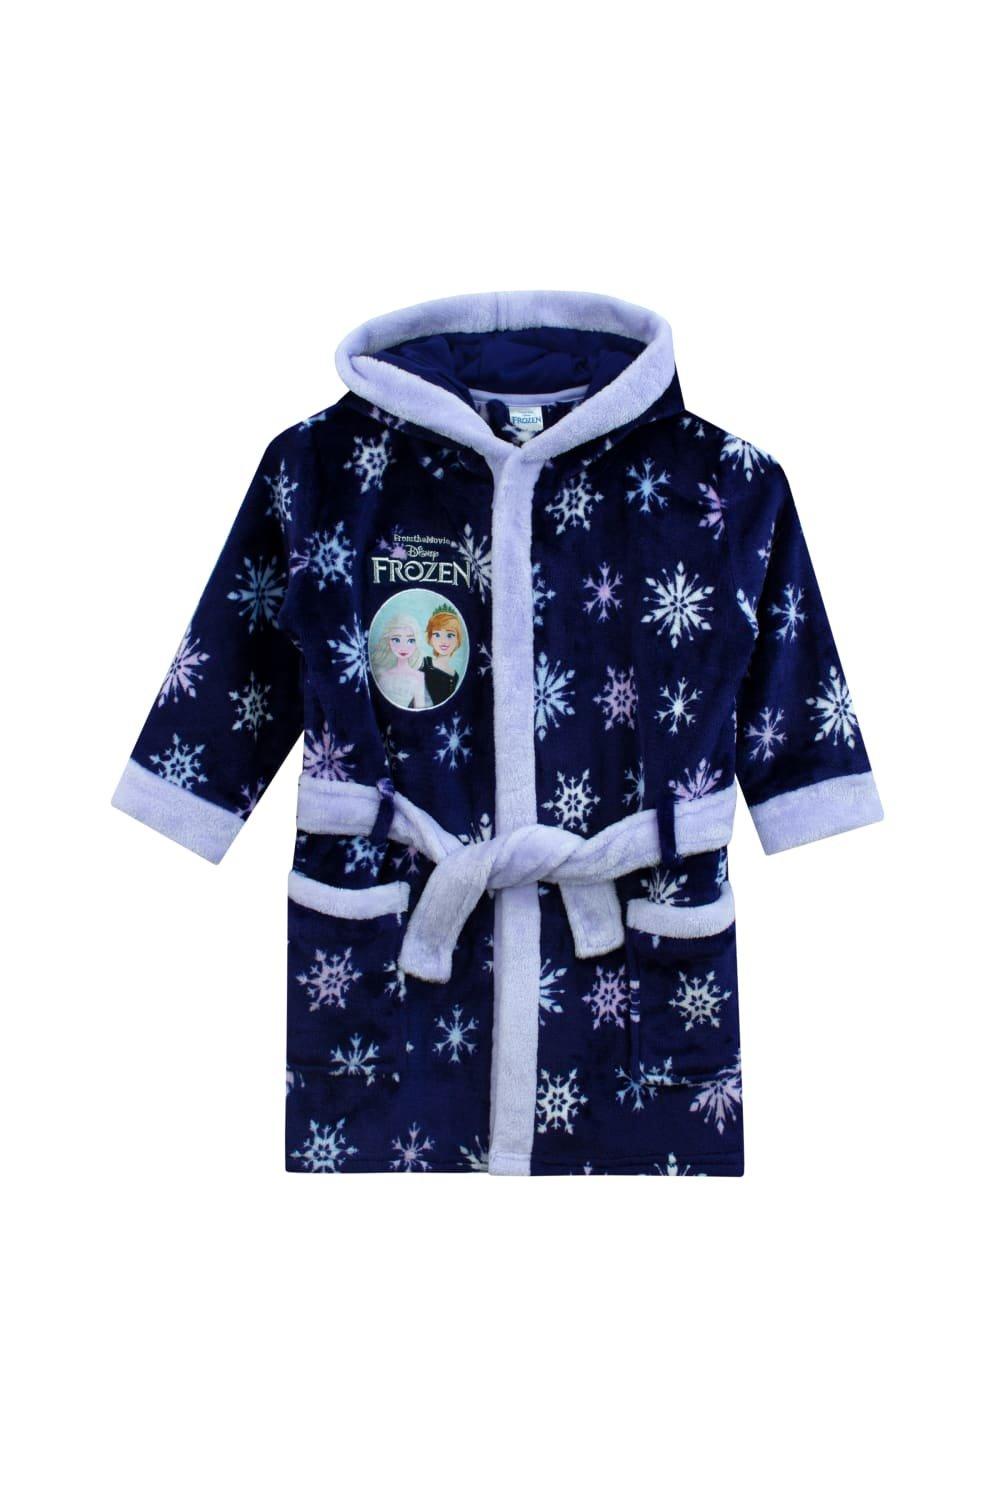 Anna And Elsa Frozen Dressing Gown